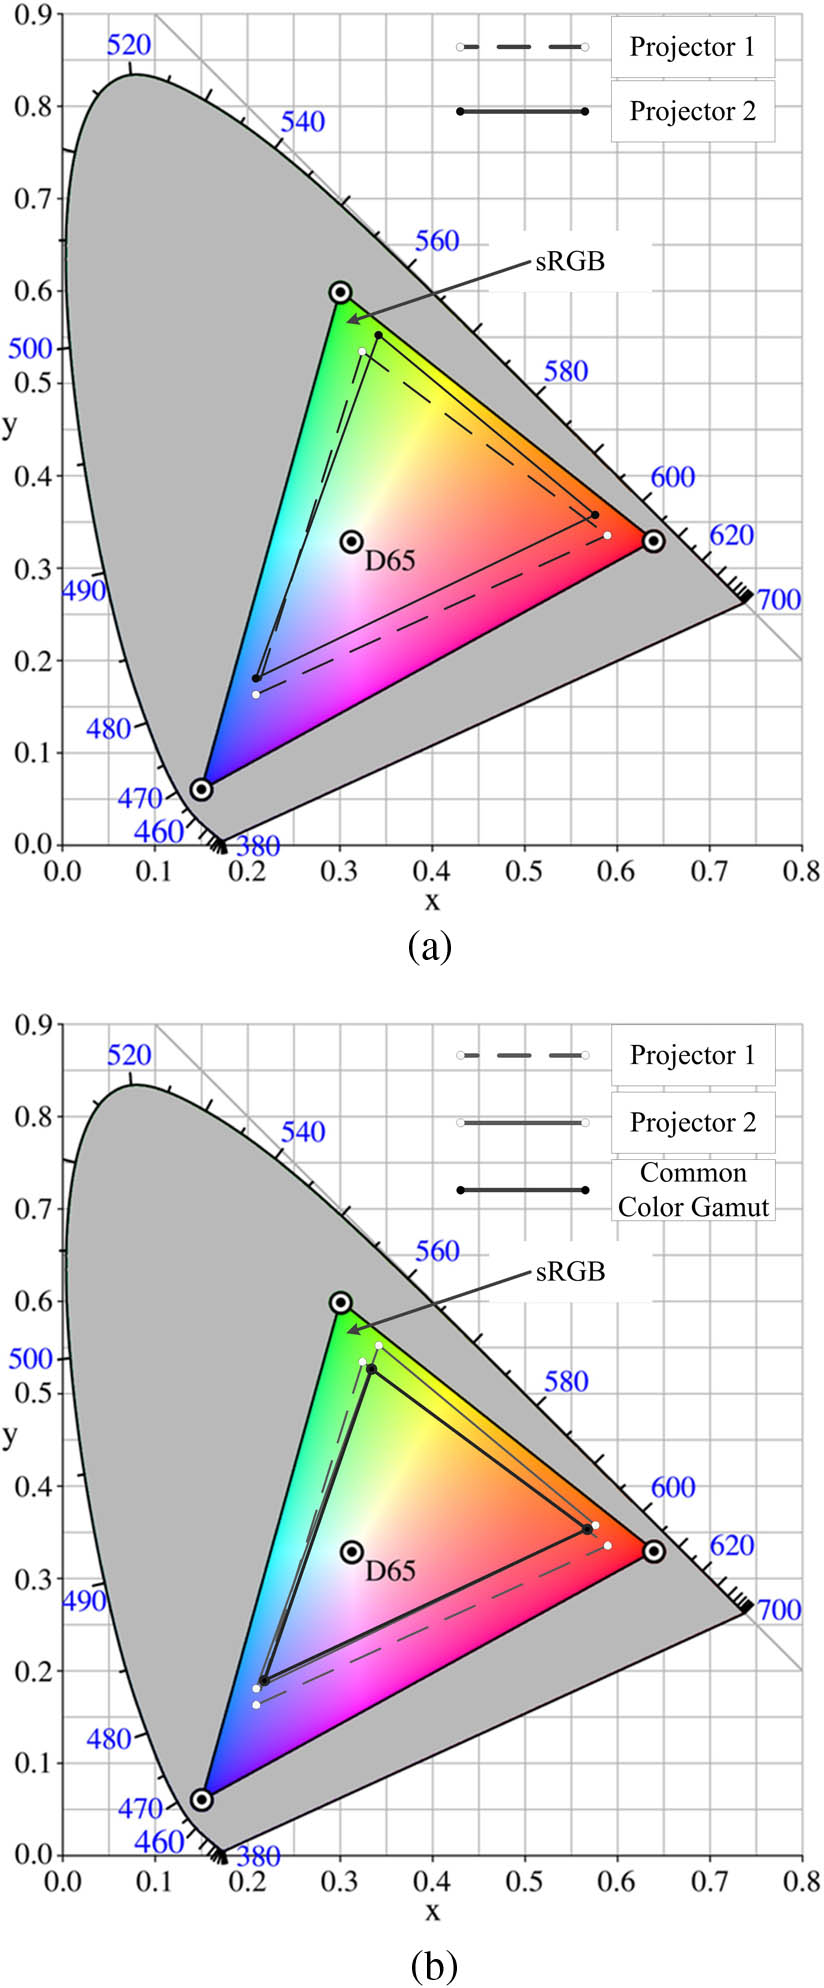 Selecting common color gamut. (a) Gamuts of two projectors. (b) Selected common gamut.